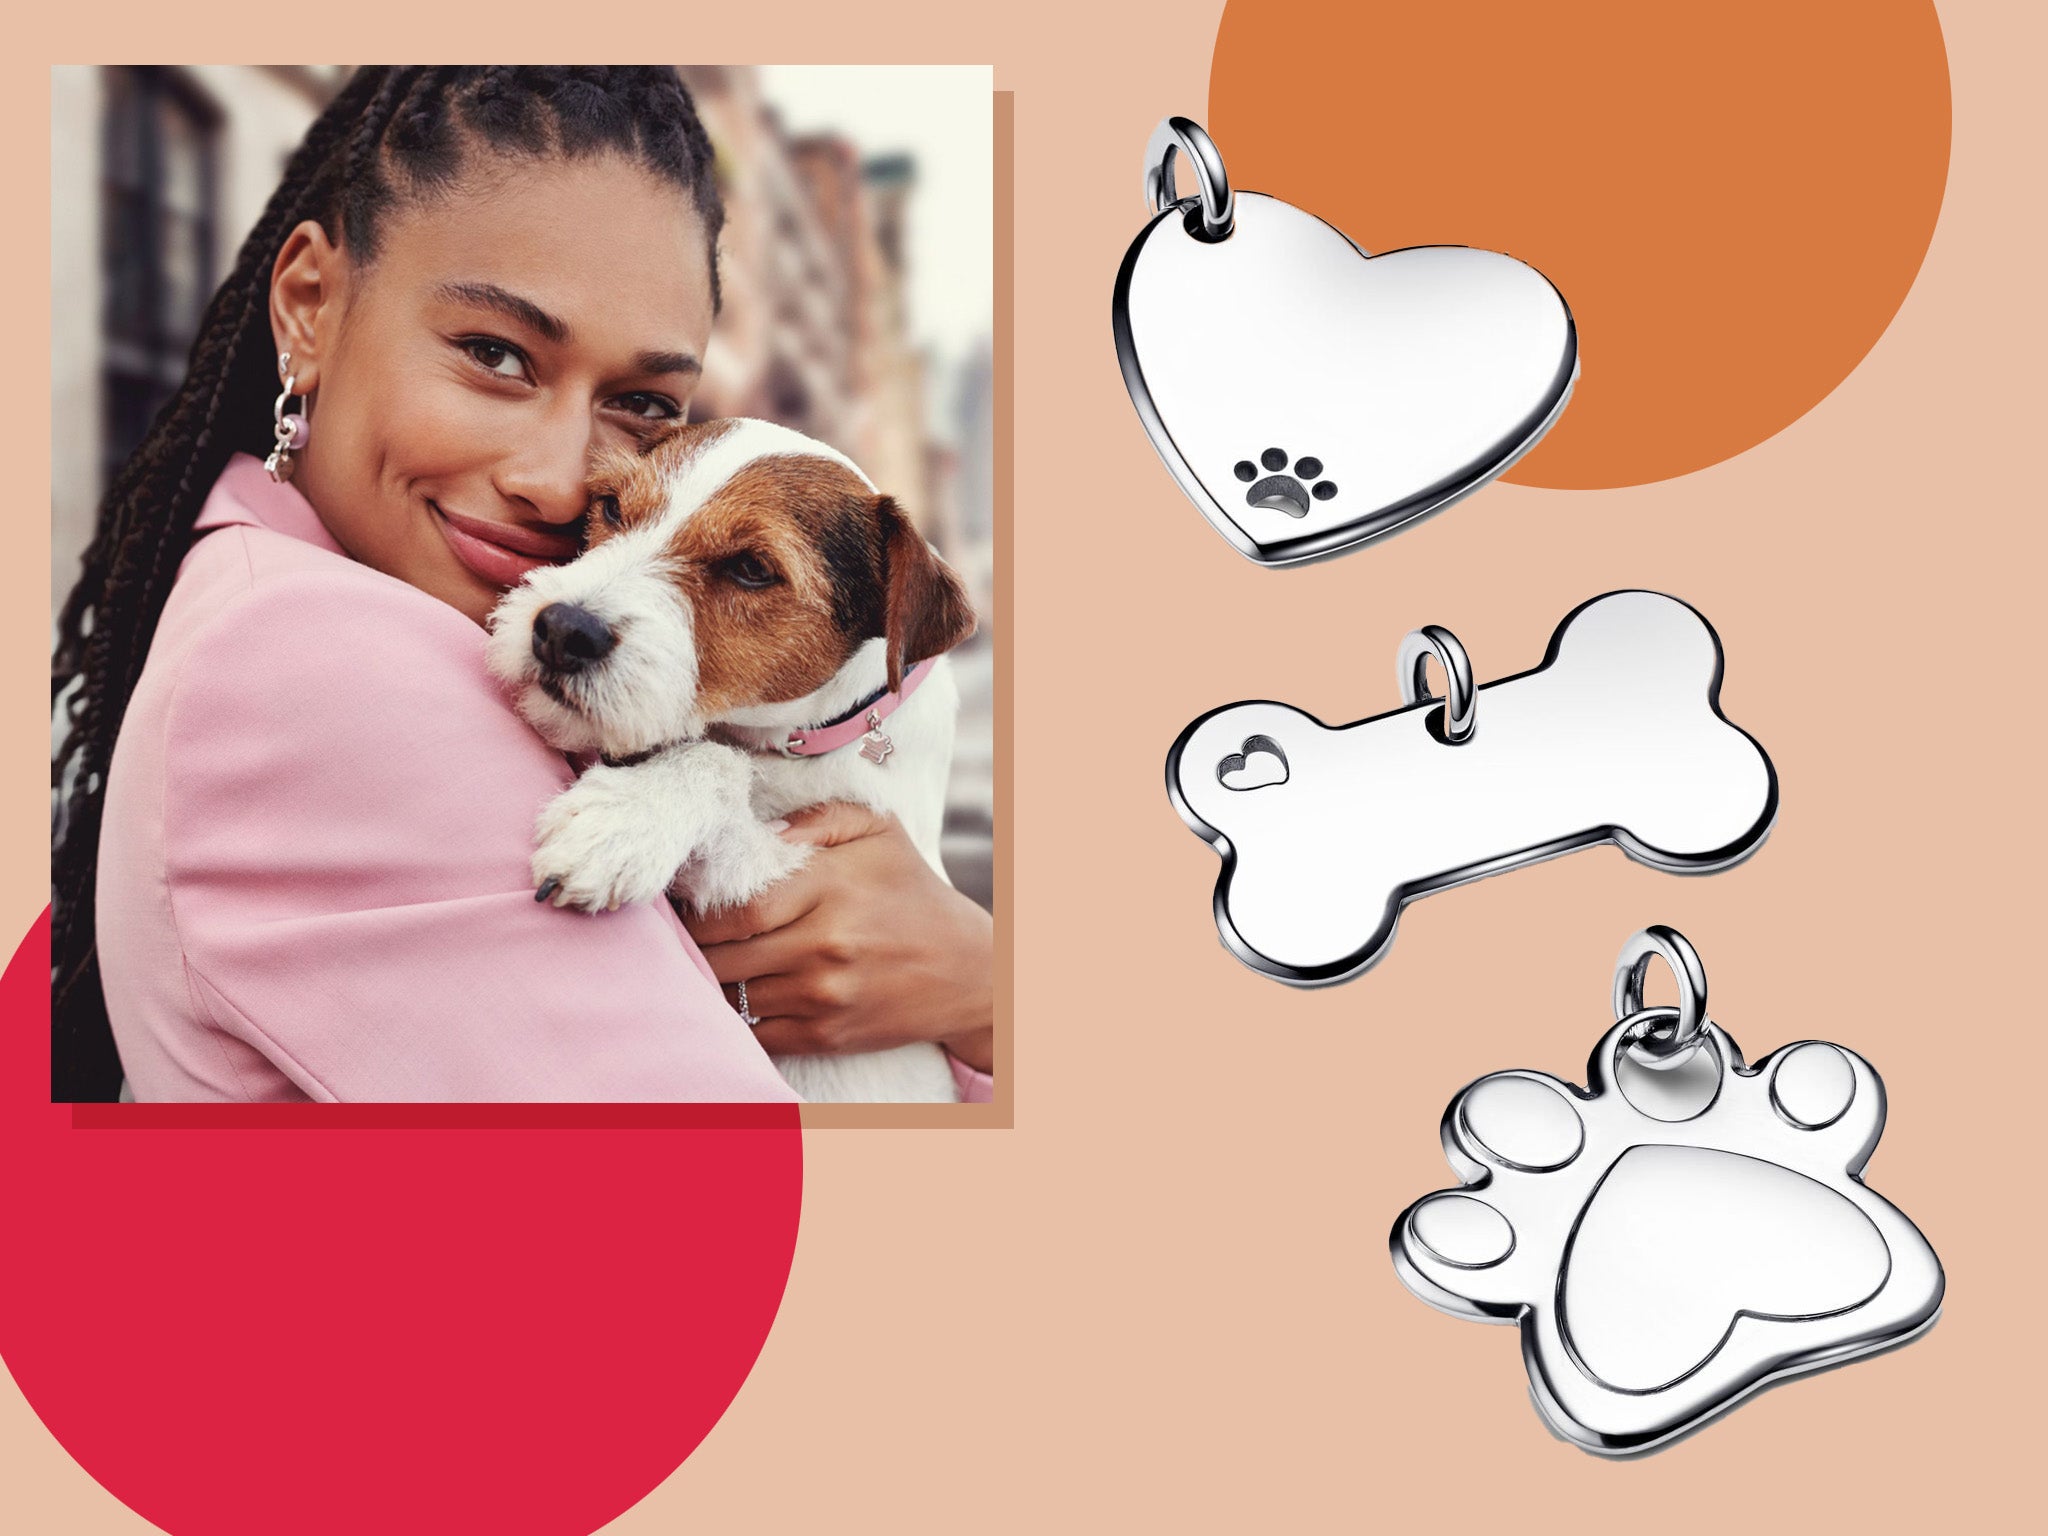 Pandora's first pet collection is here with dog and cat collars, plus  engraveable tags